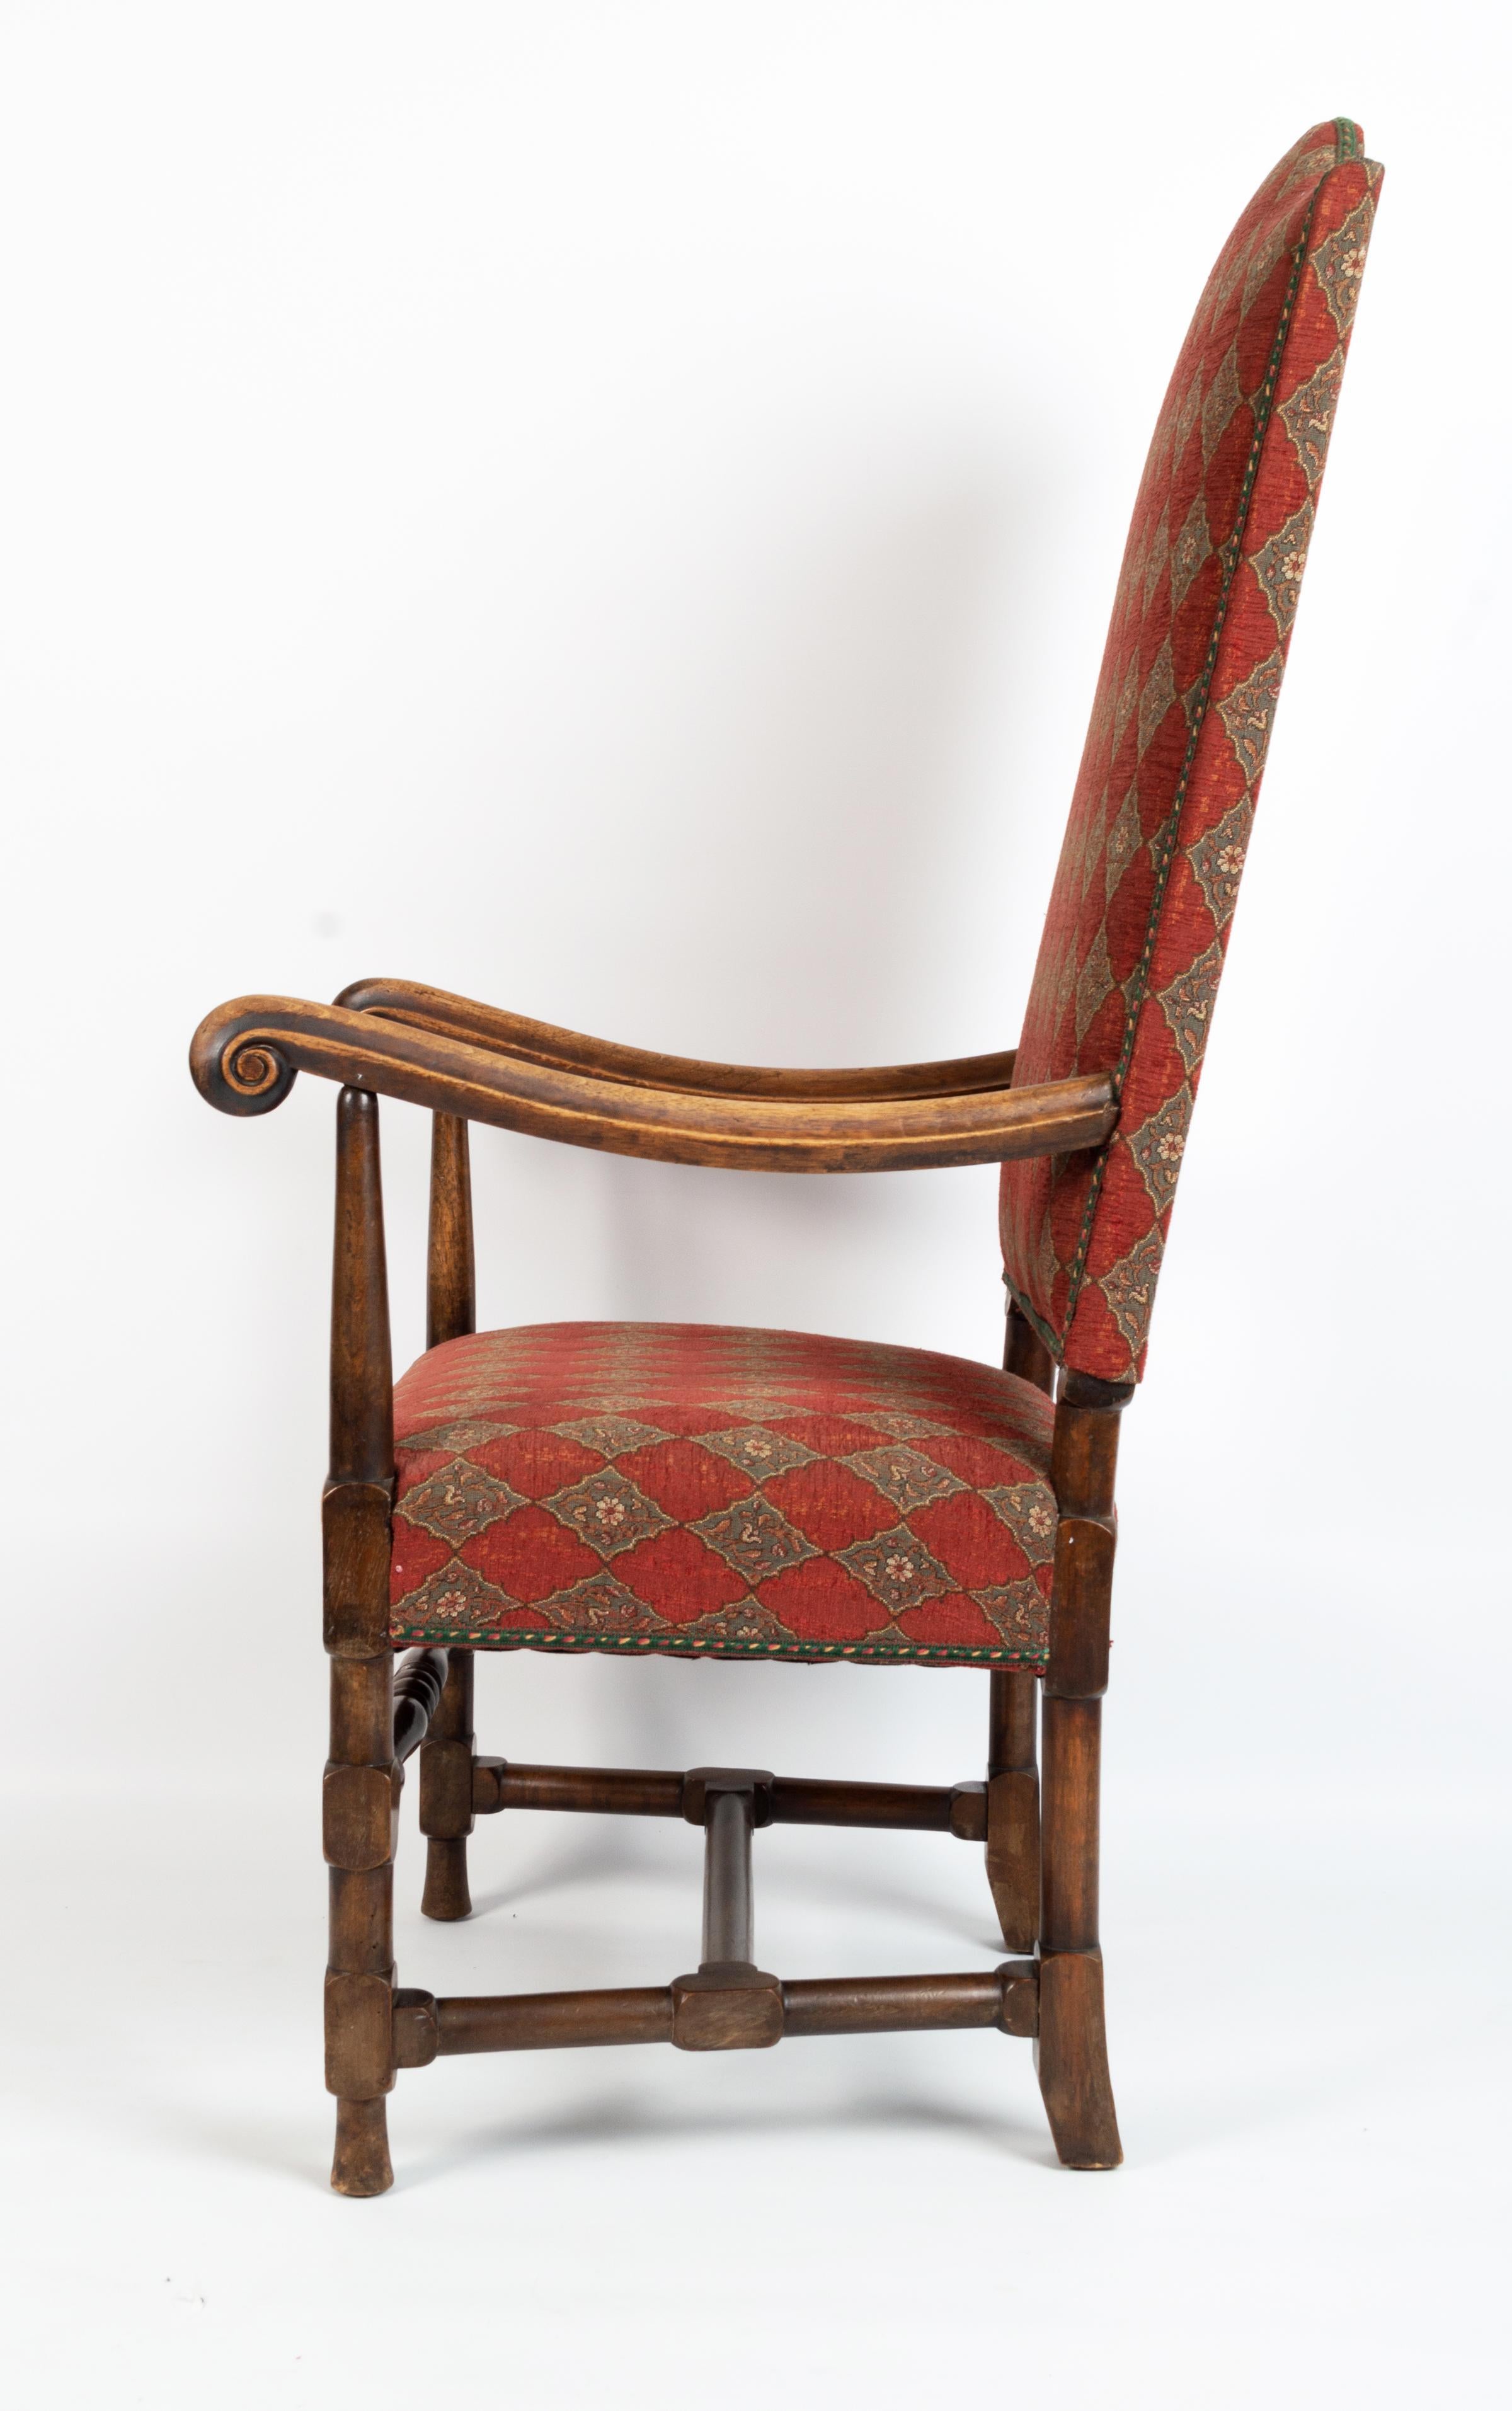 English 19th Century Charles II Style Upholstered High Back Elbow Chair For Sale 2